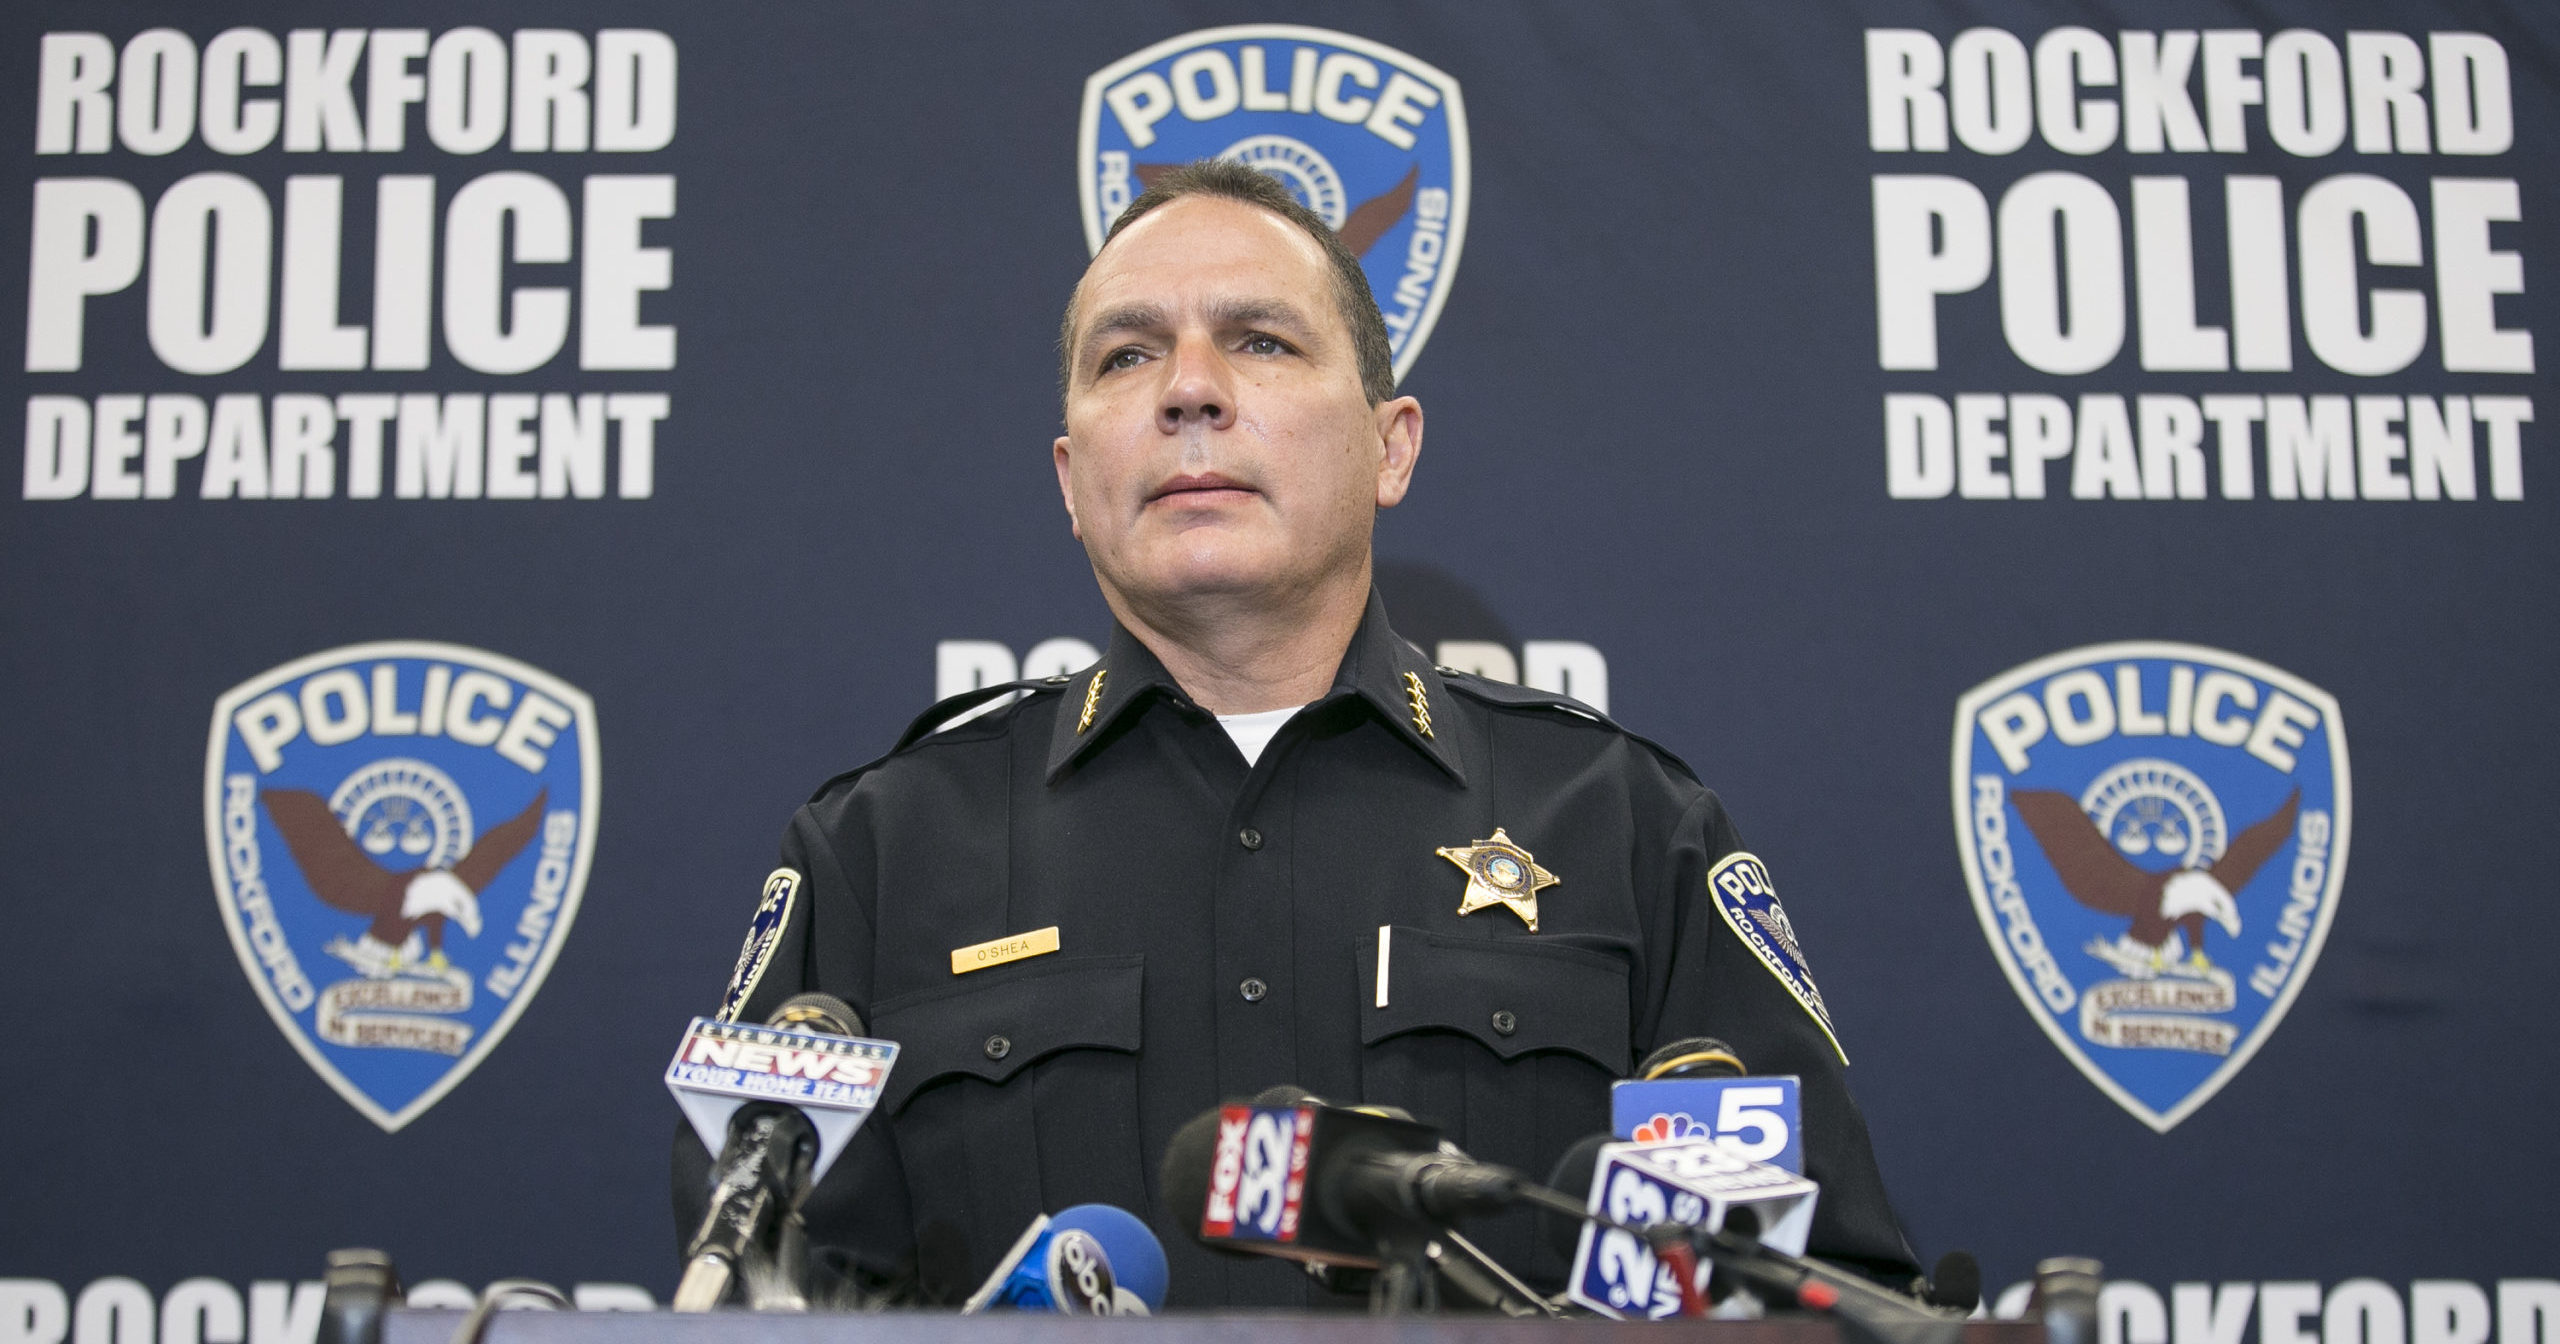 Rockford Police Chief Dan O'Shea speaks during a news conference on Dec. 27, 2020, in Rockford, Illinois.